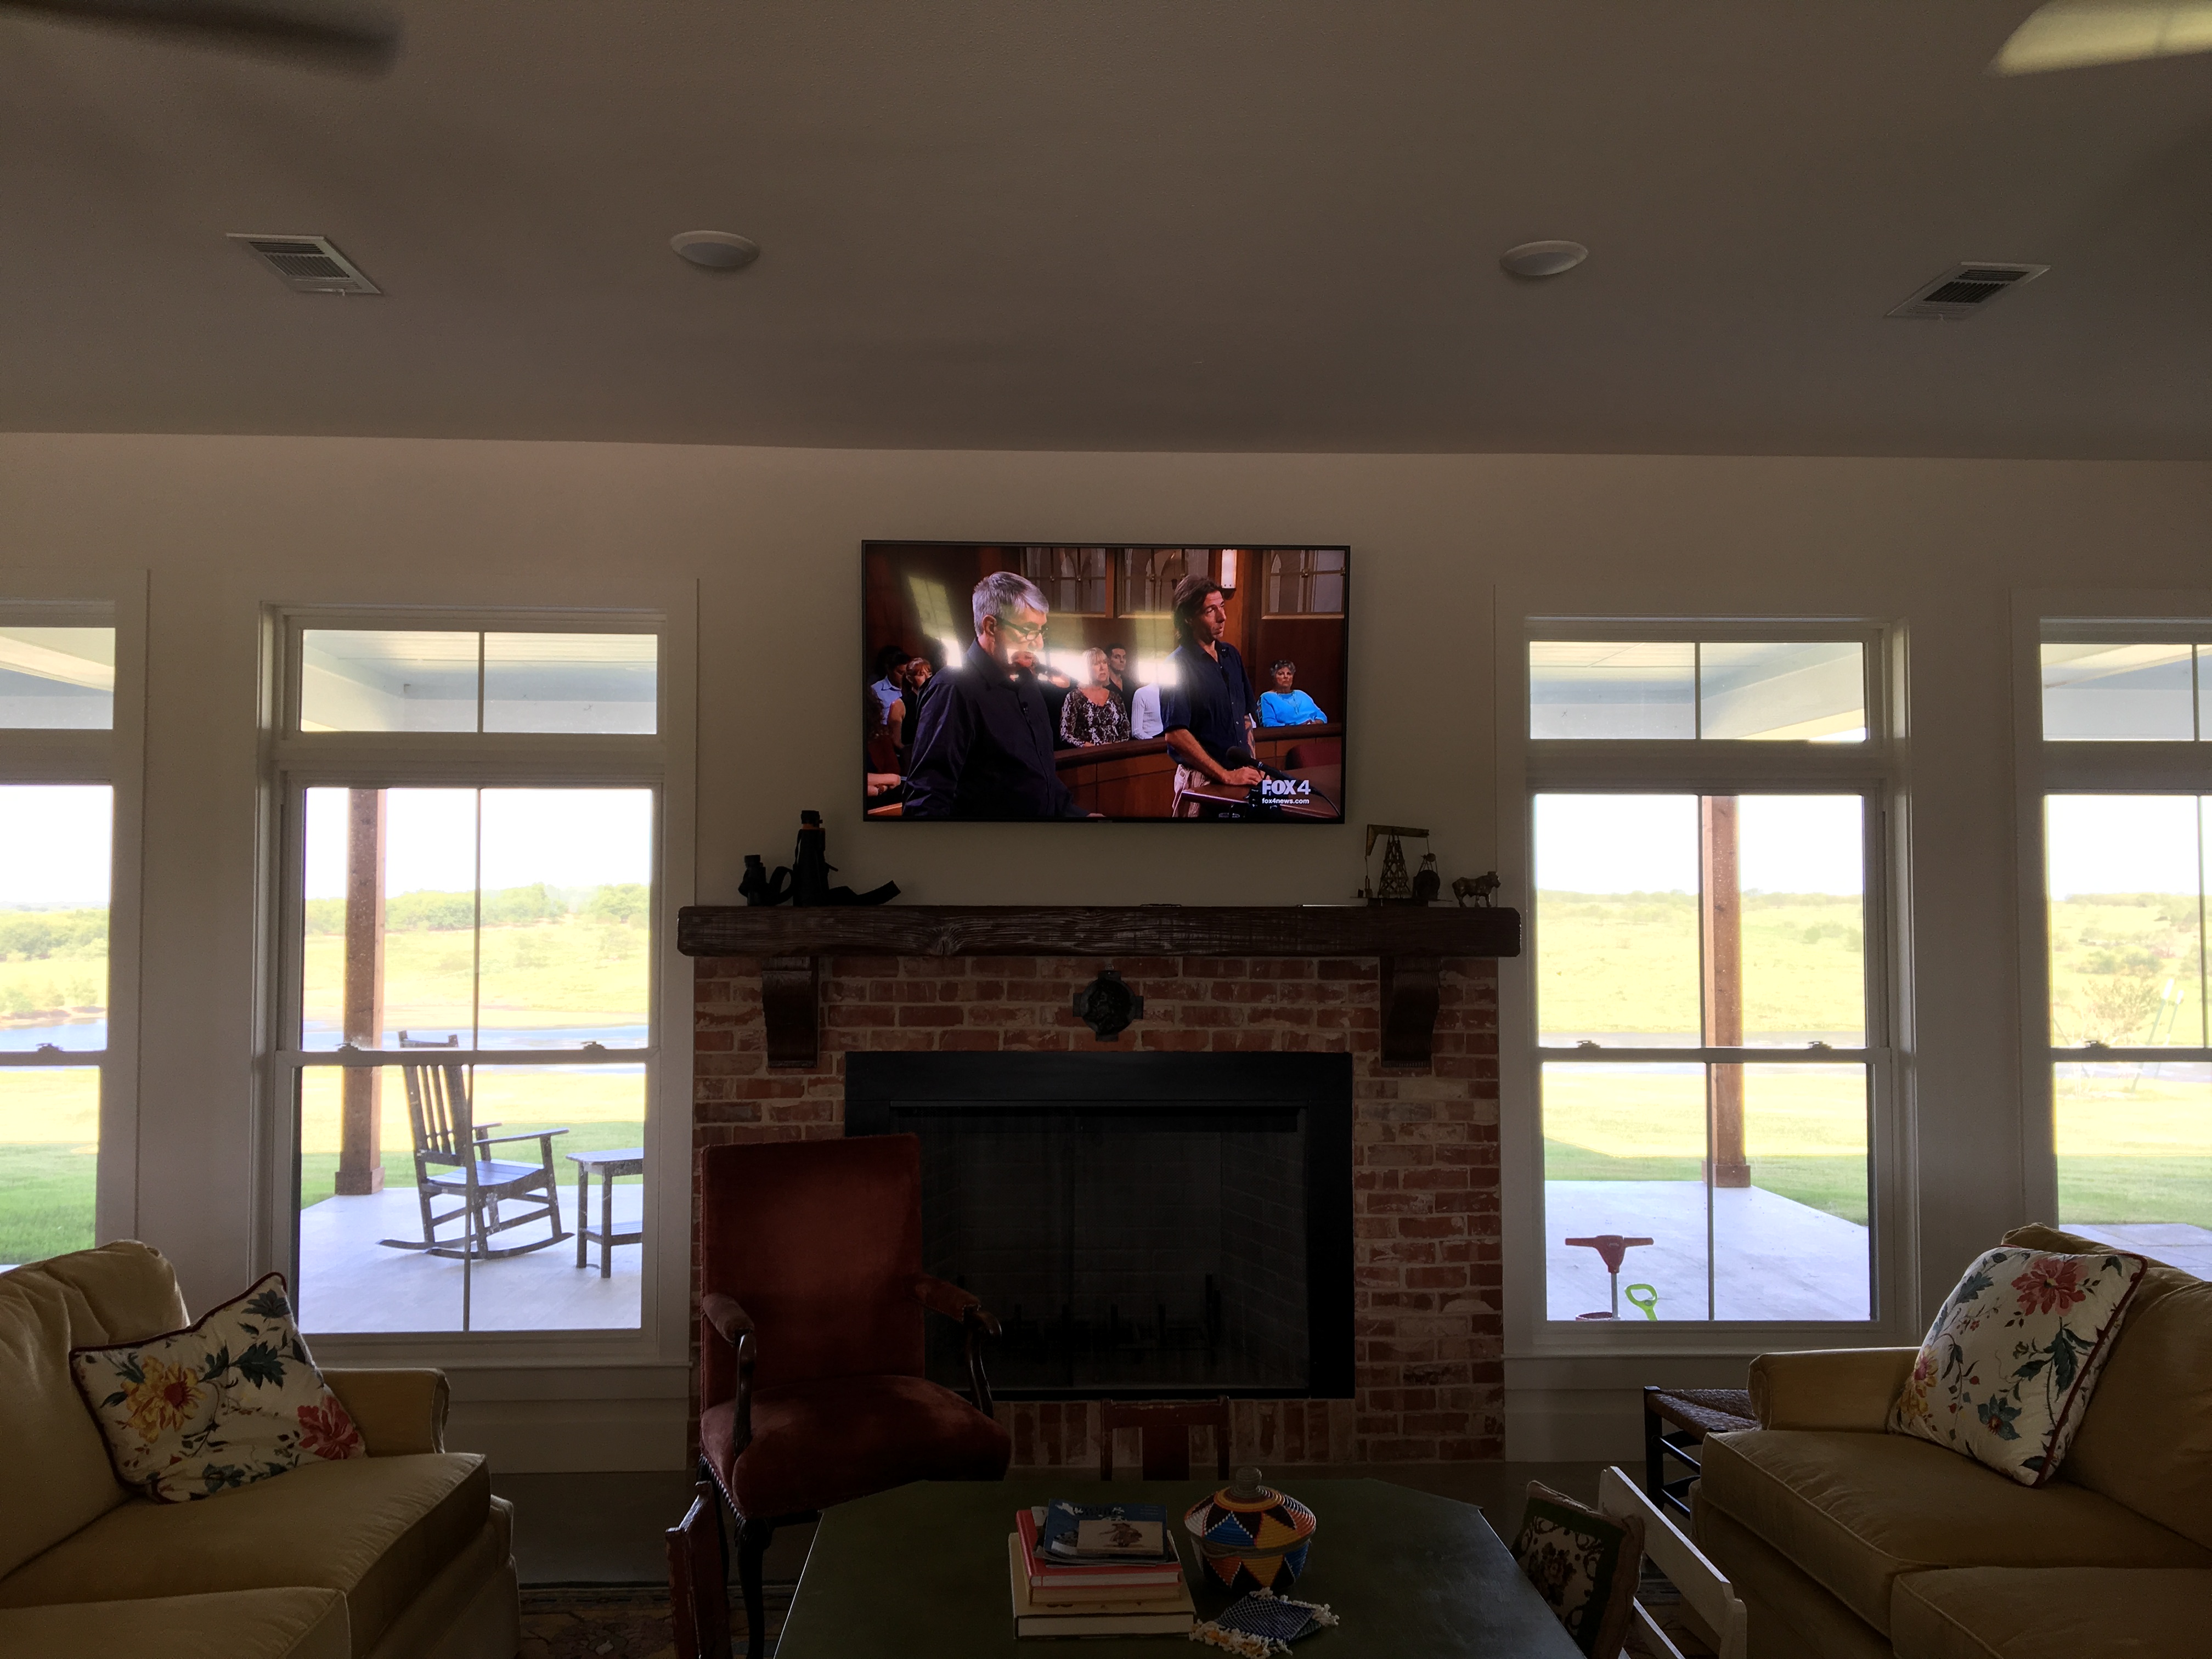 TV over fireplace